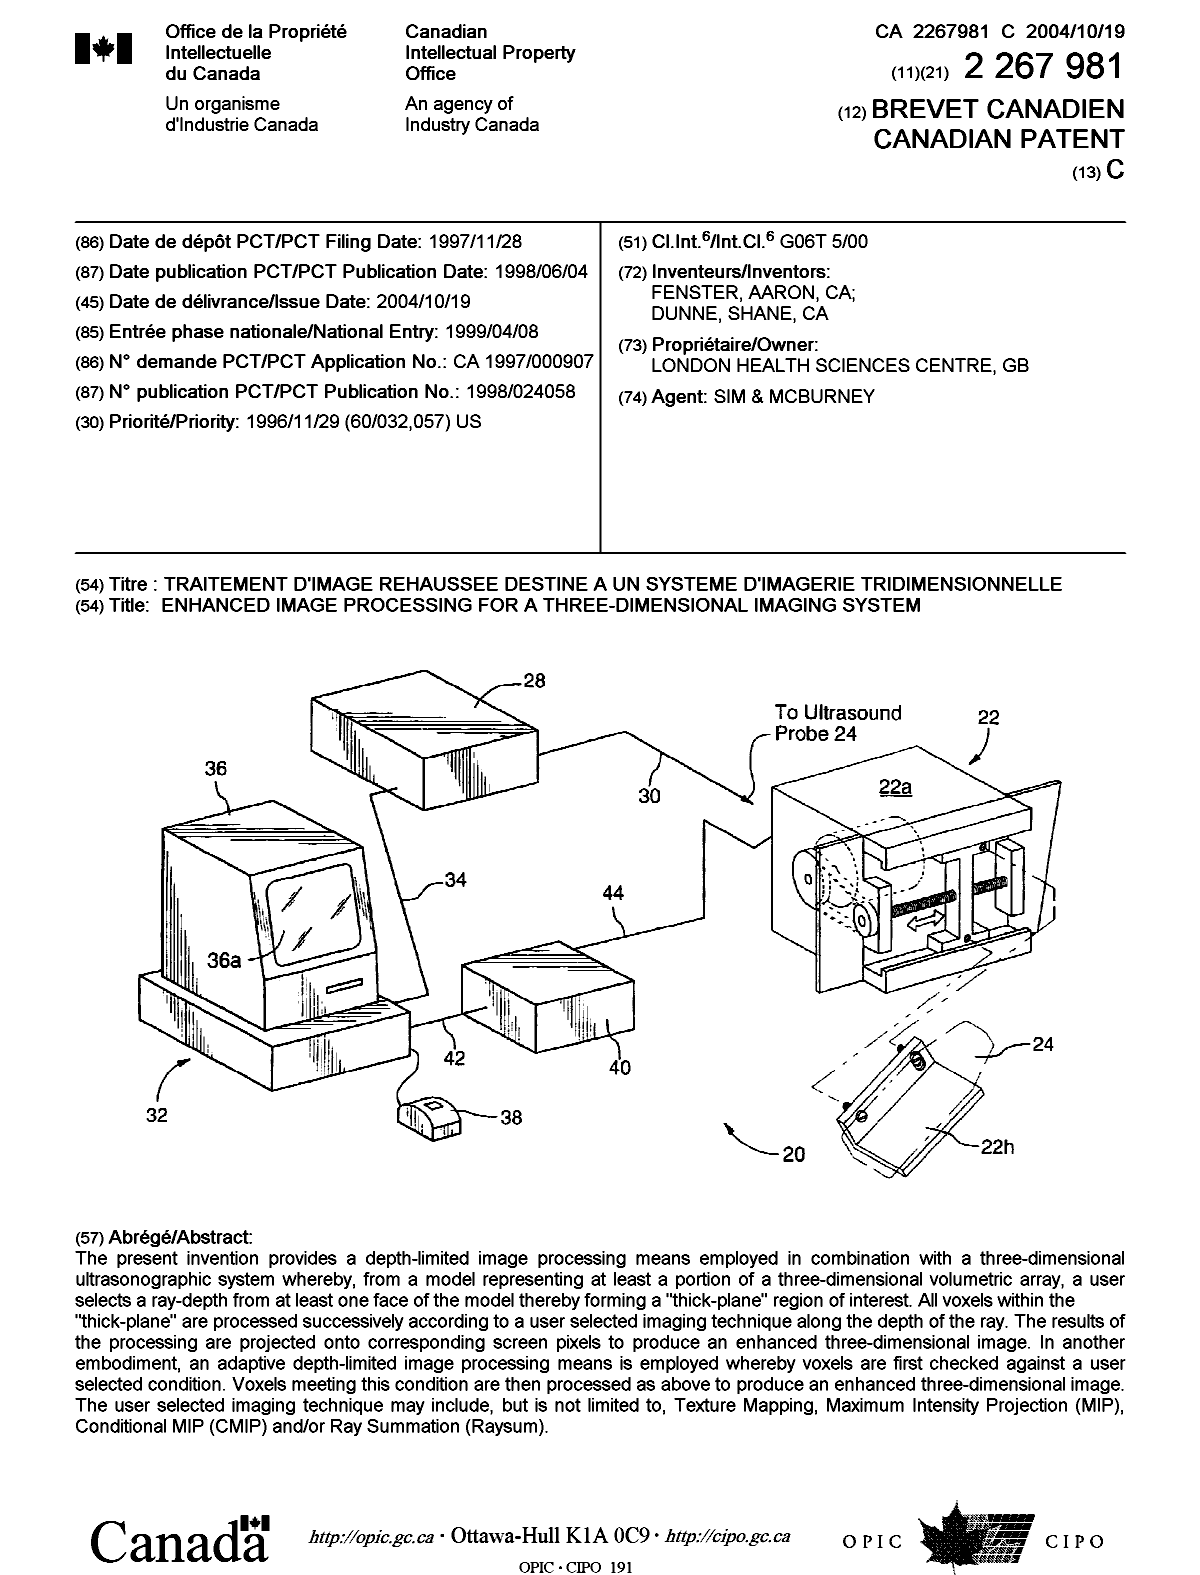 Canadian Patent Document 2267981. Cover Page 20040922. Image 1 of 1